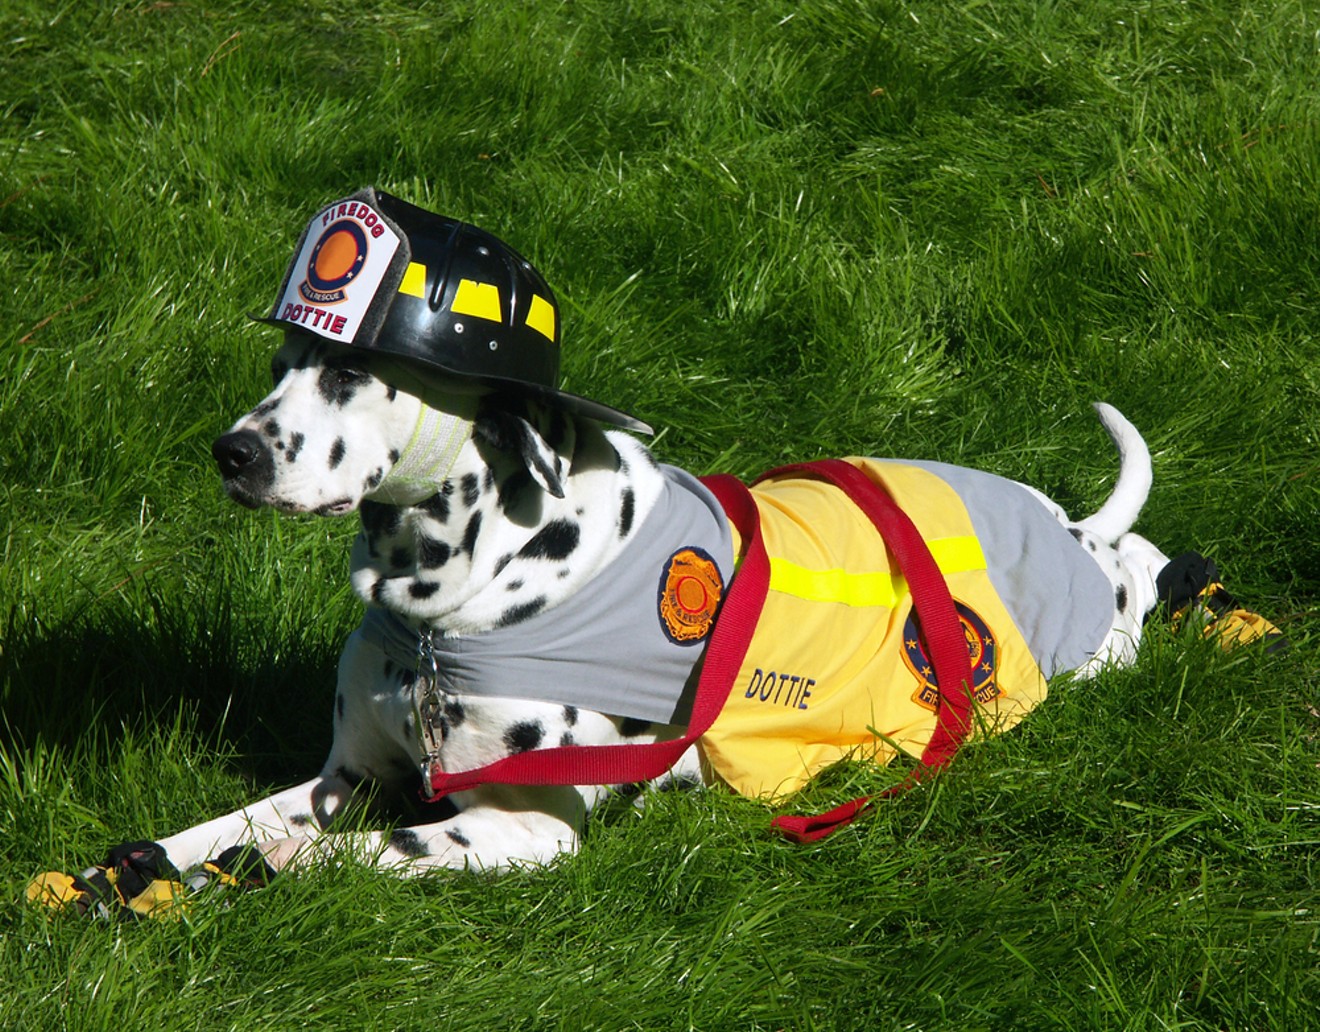 When fire engines were drawn by horses, departments used dogs to keep the horses calm.